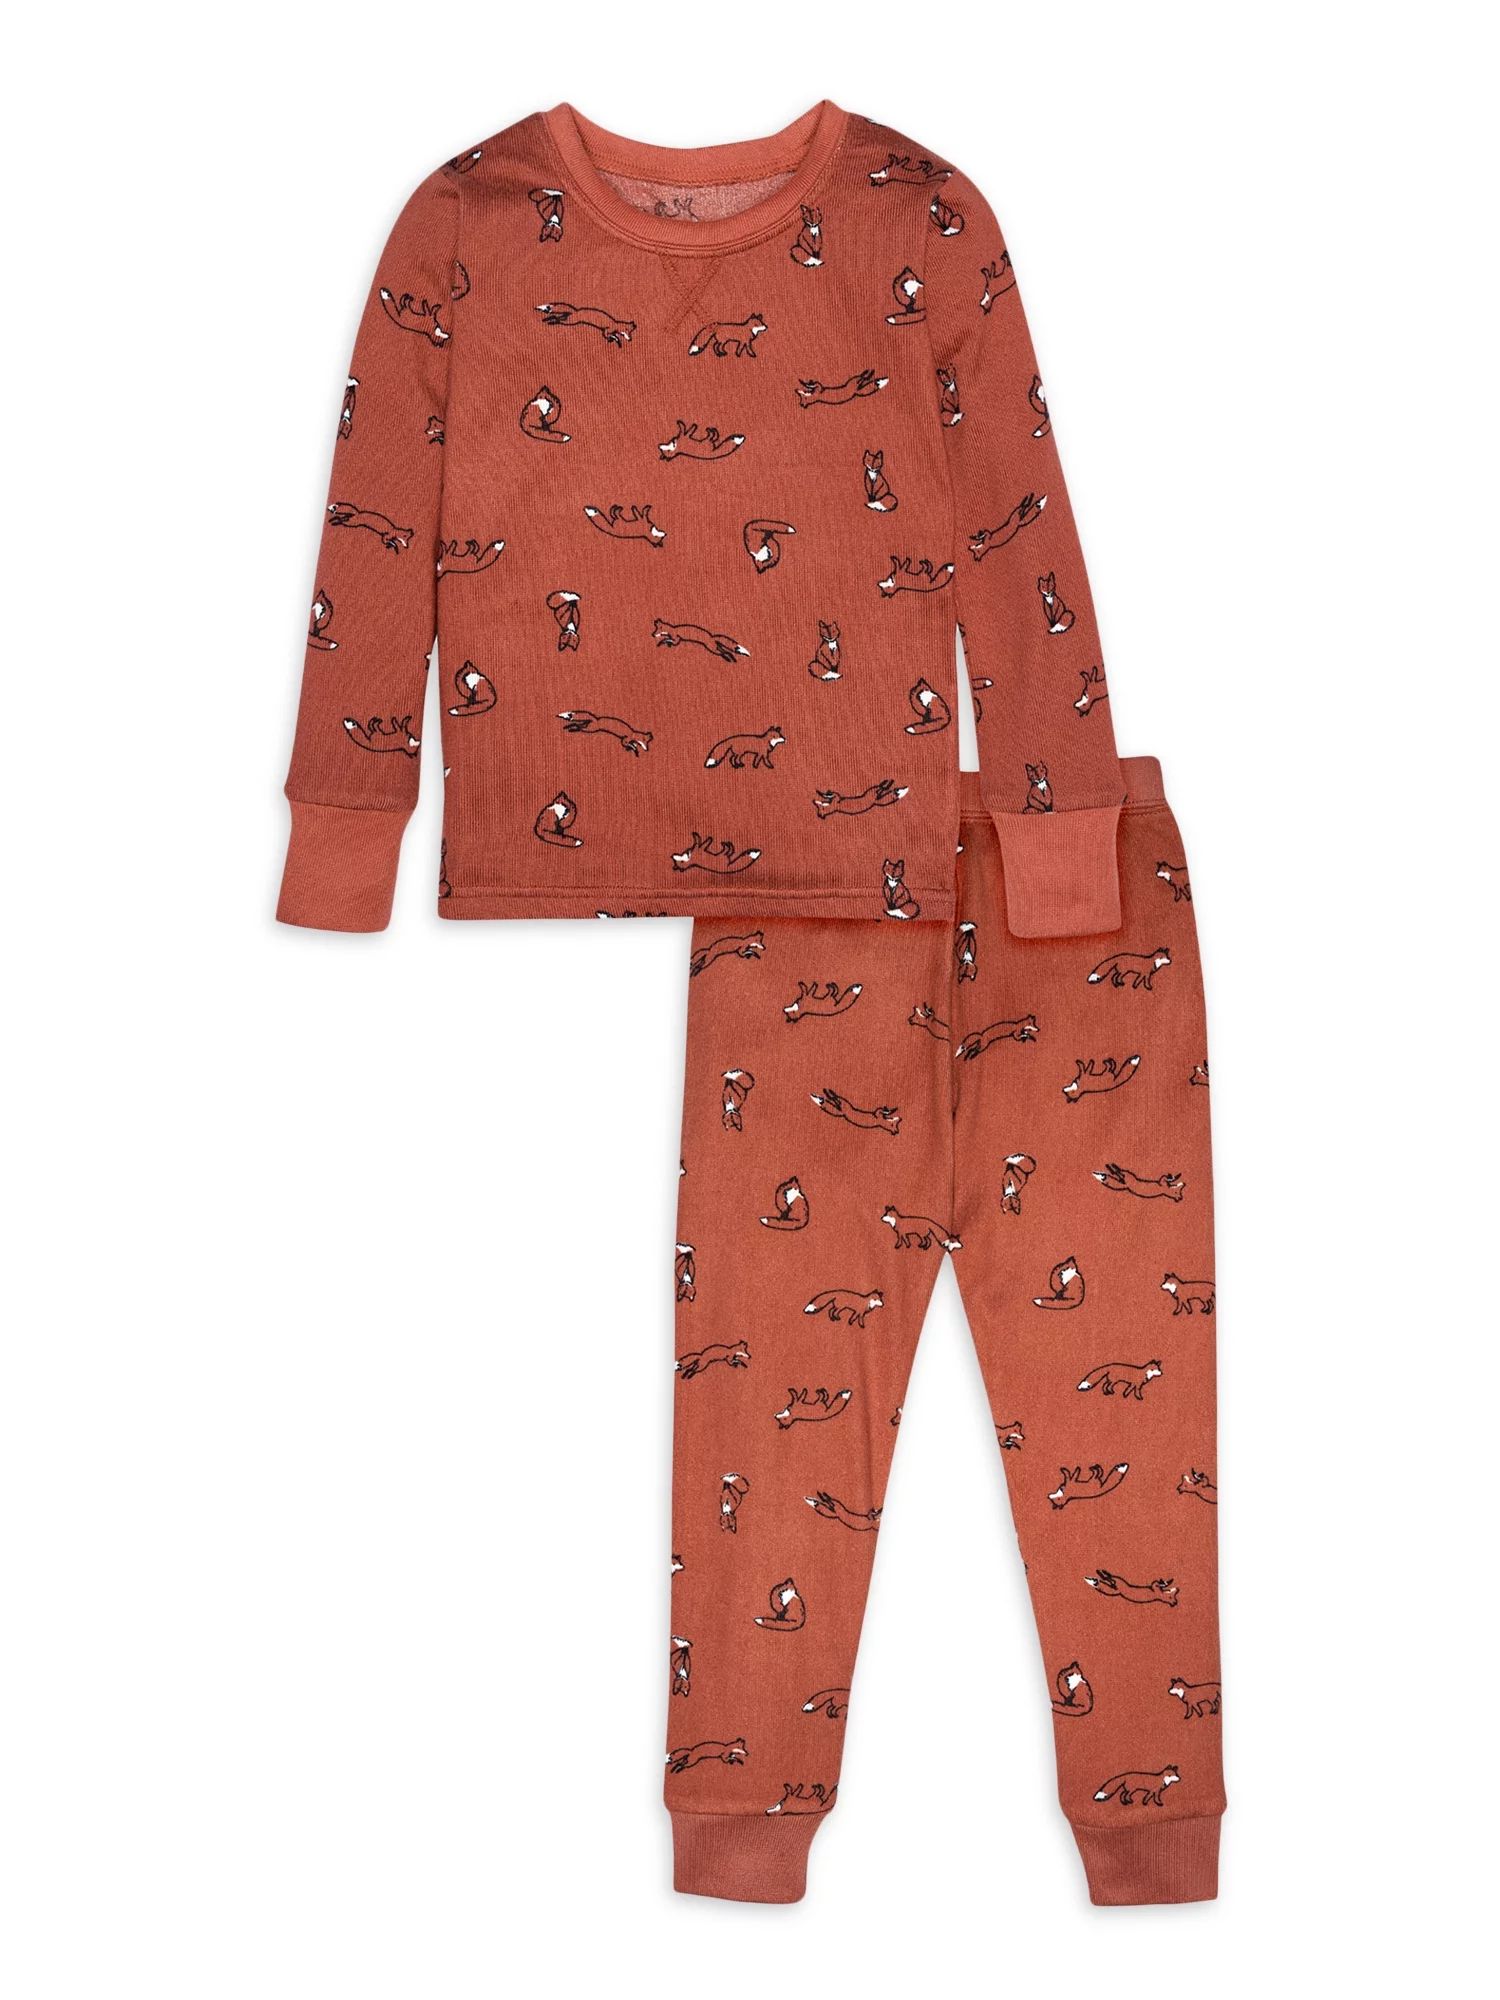 Modern Moments by Gerber Toddler Boy Tight Fitting Pajamas Set, 2-Piece, Sizes 12M-5T | Walmart (US)